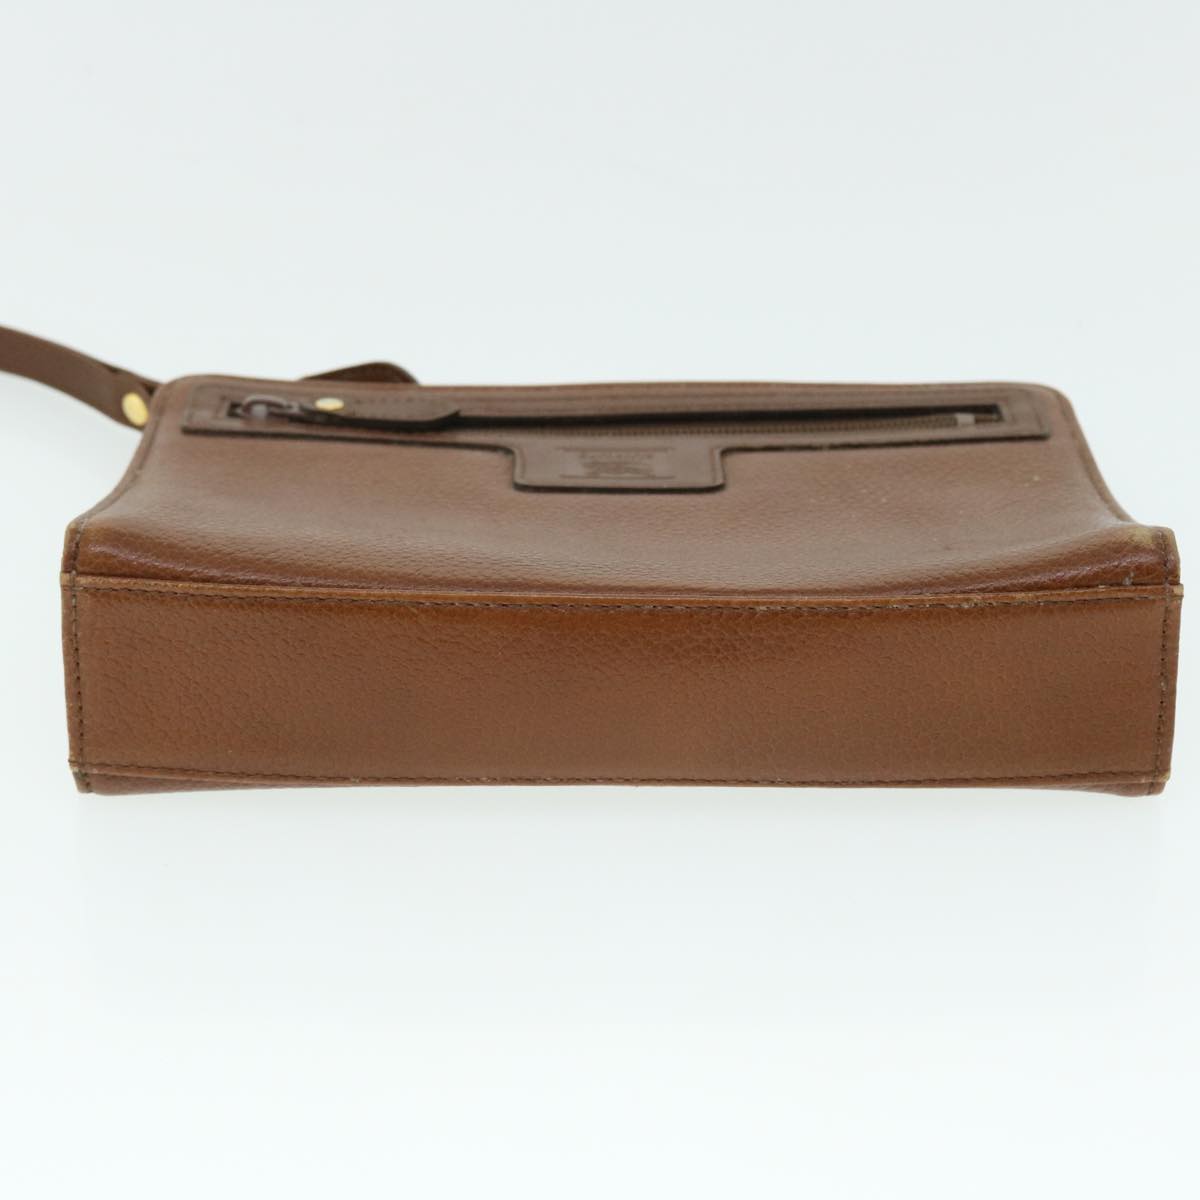 Burberrys Clutch Bag Leather Brown Auth 51663